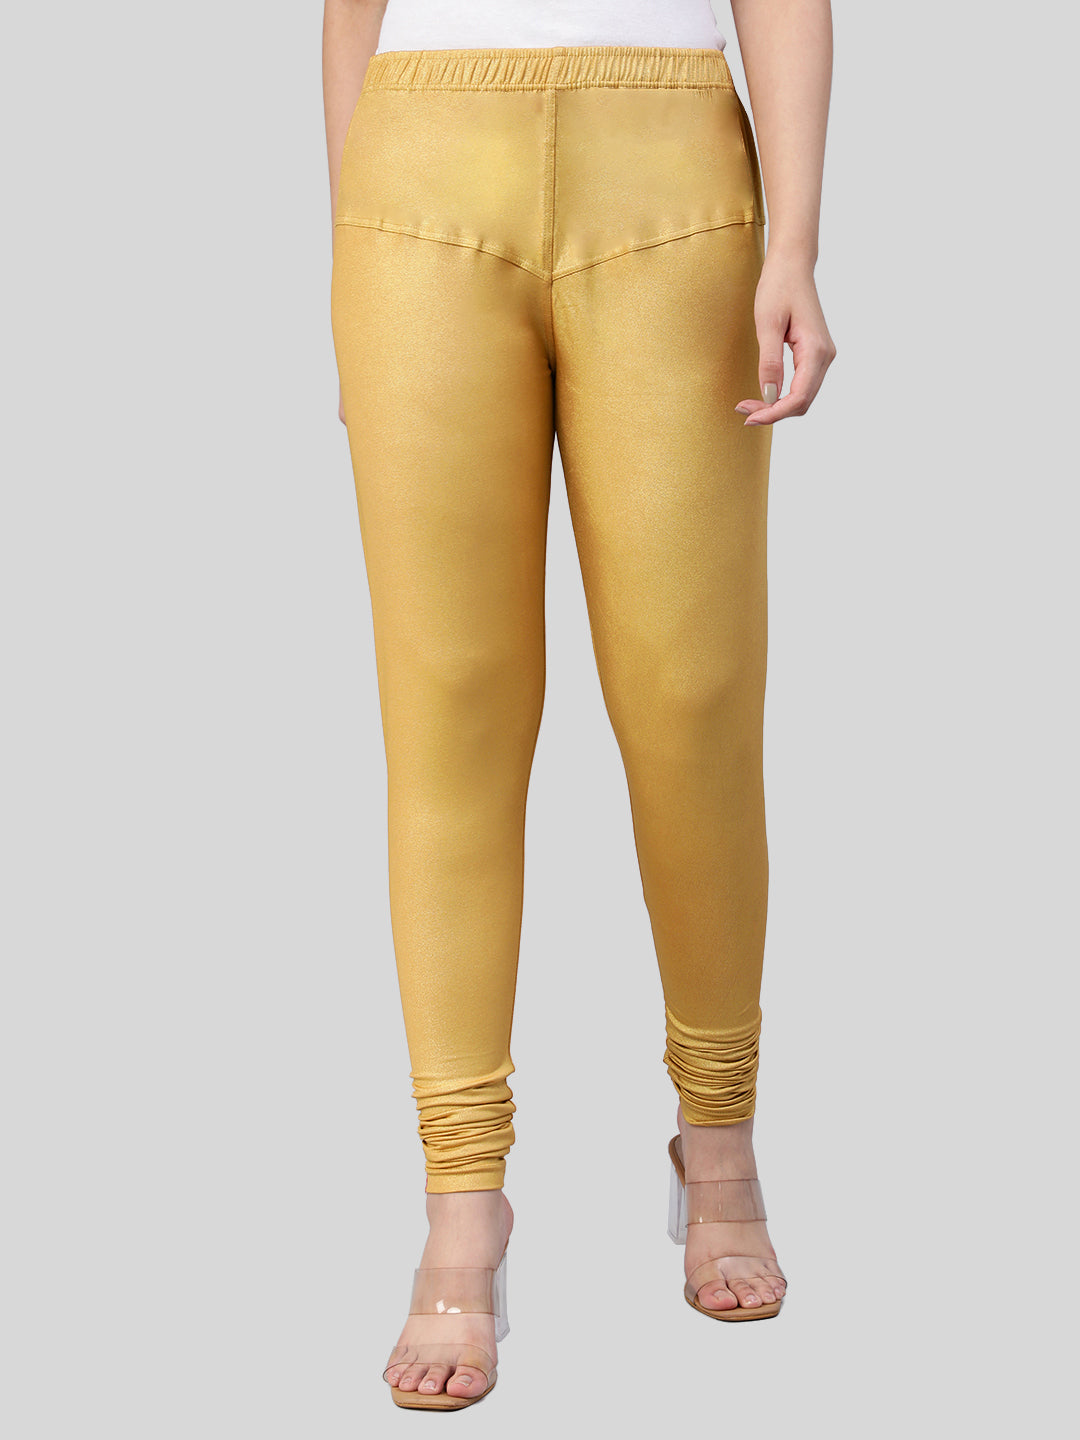 Buy Lux Lyra Off White,Yellow Cotton Churidar Leggings Pack of 2 at  Amazon.in